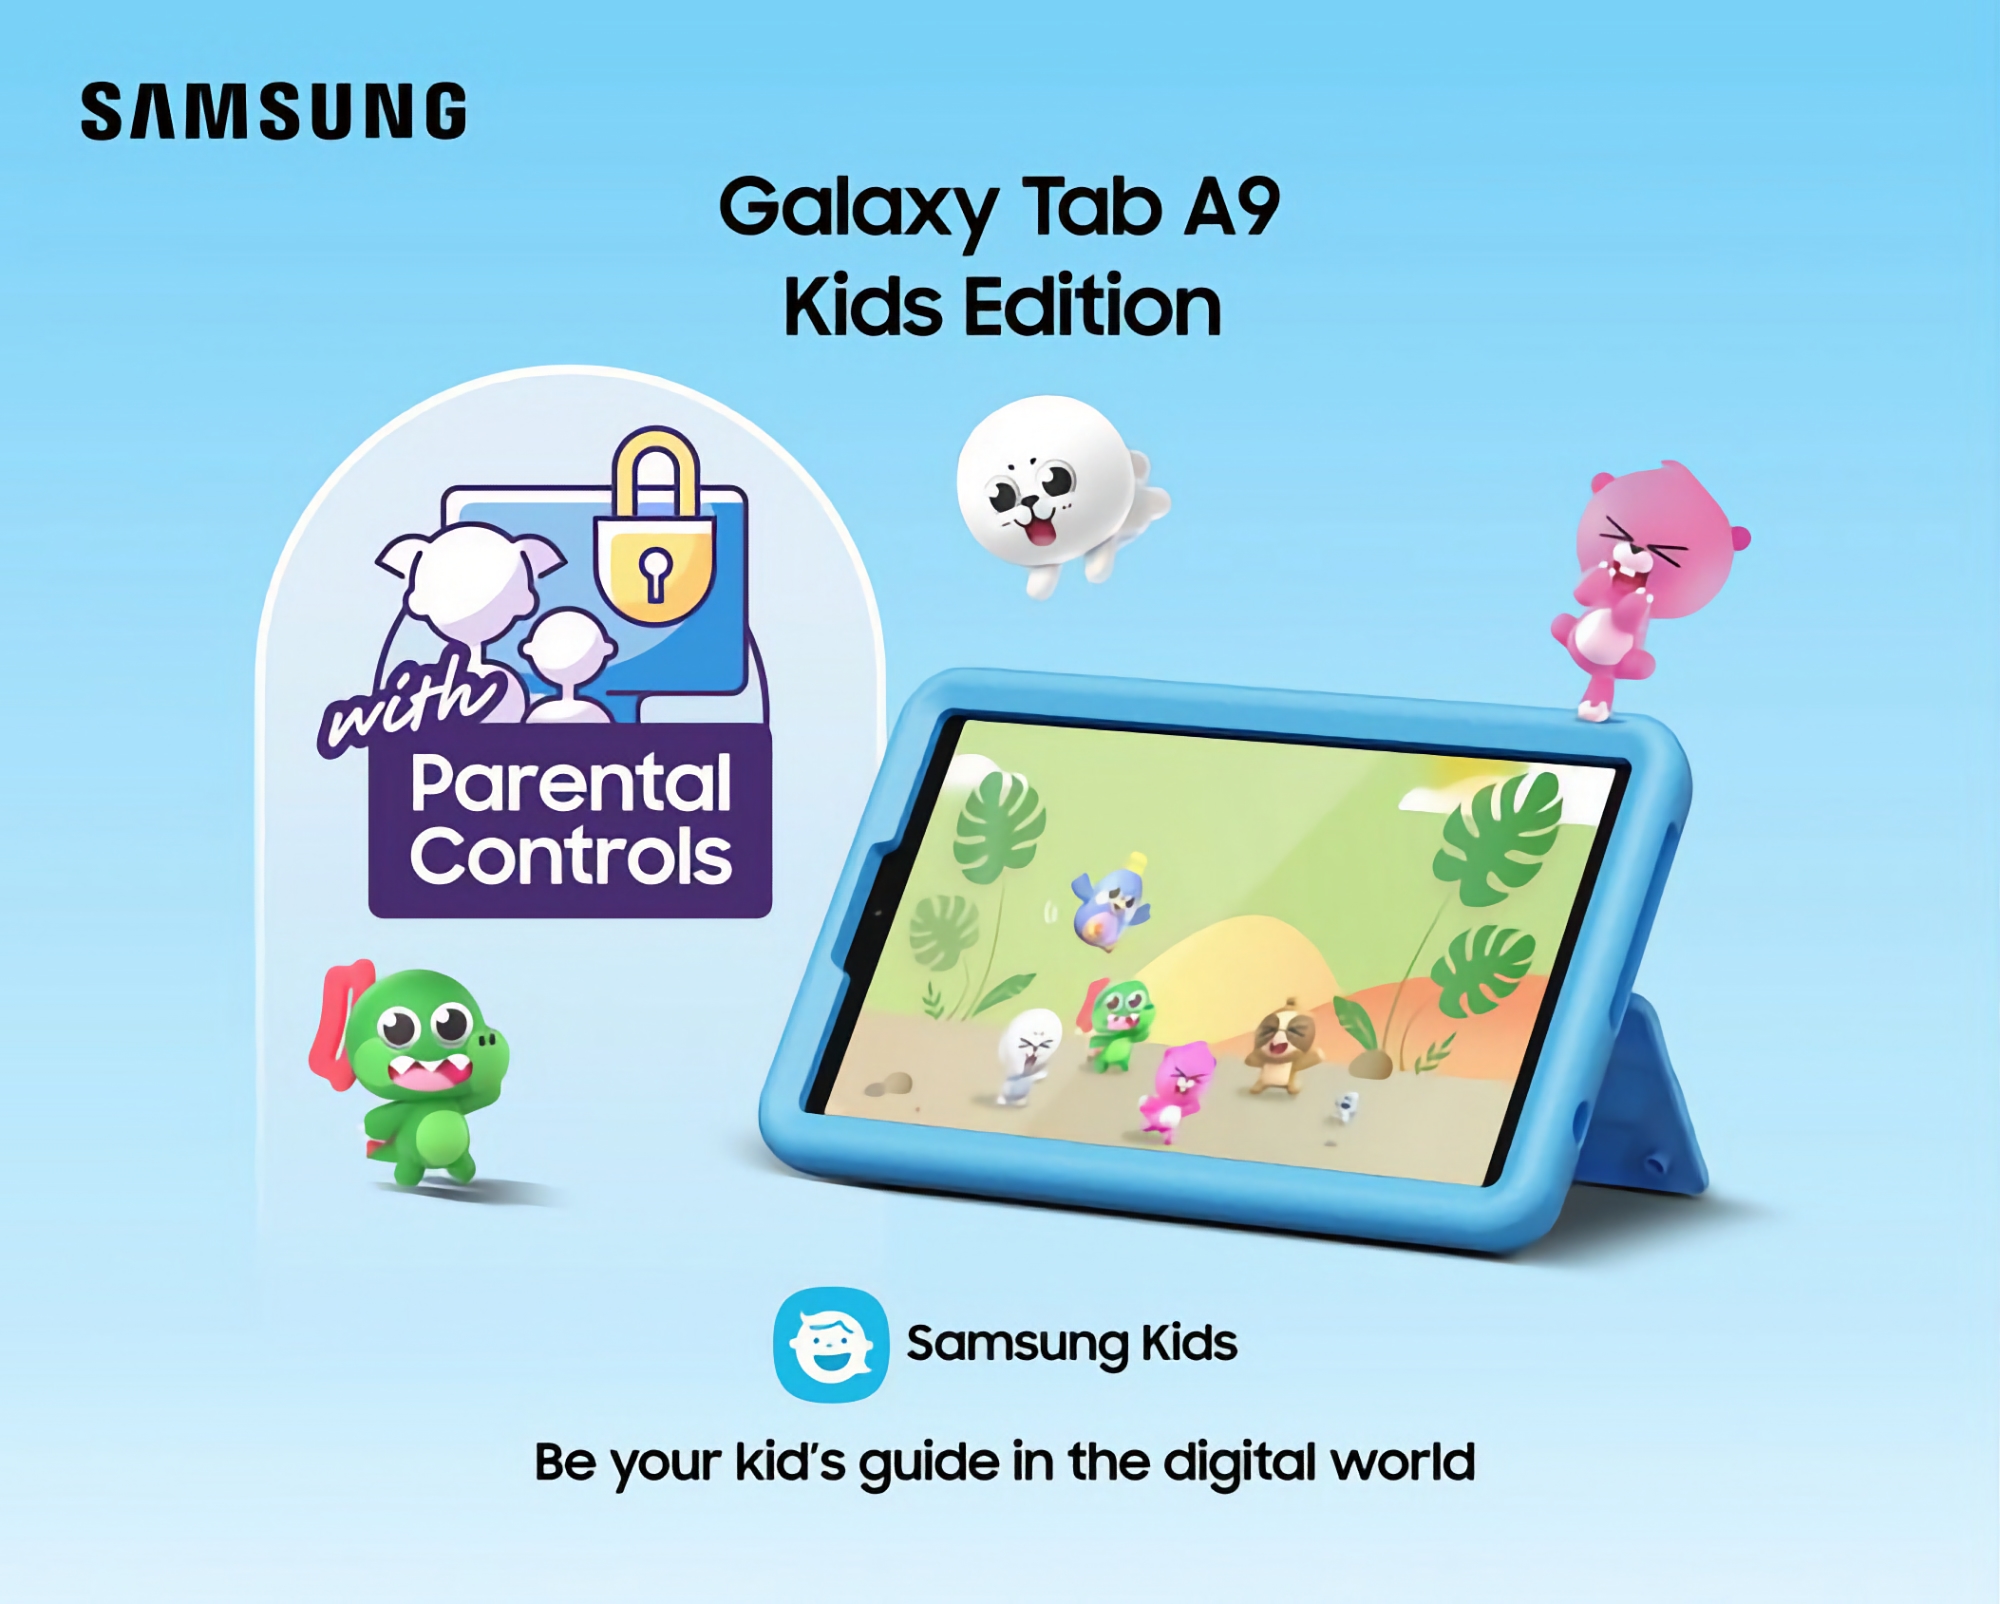 Samsung has unveiled a special version of the Galaxy Tab A9 for kids